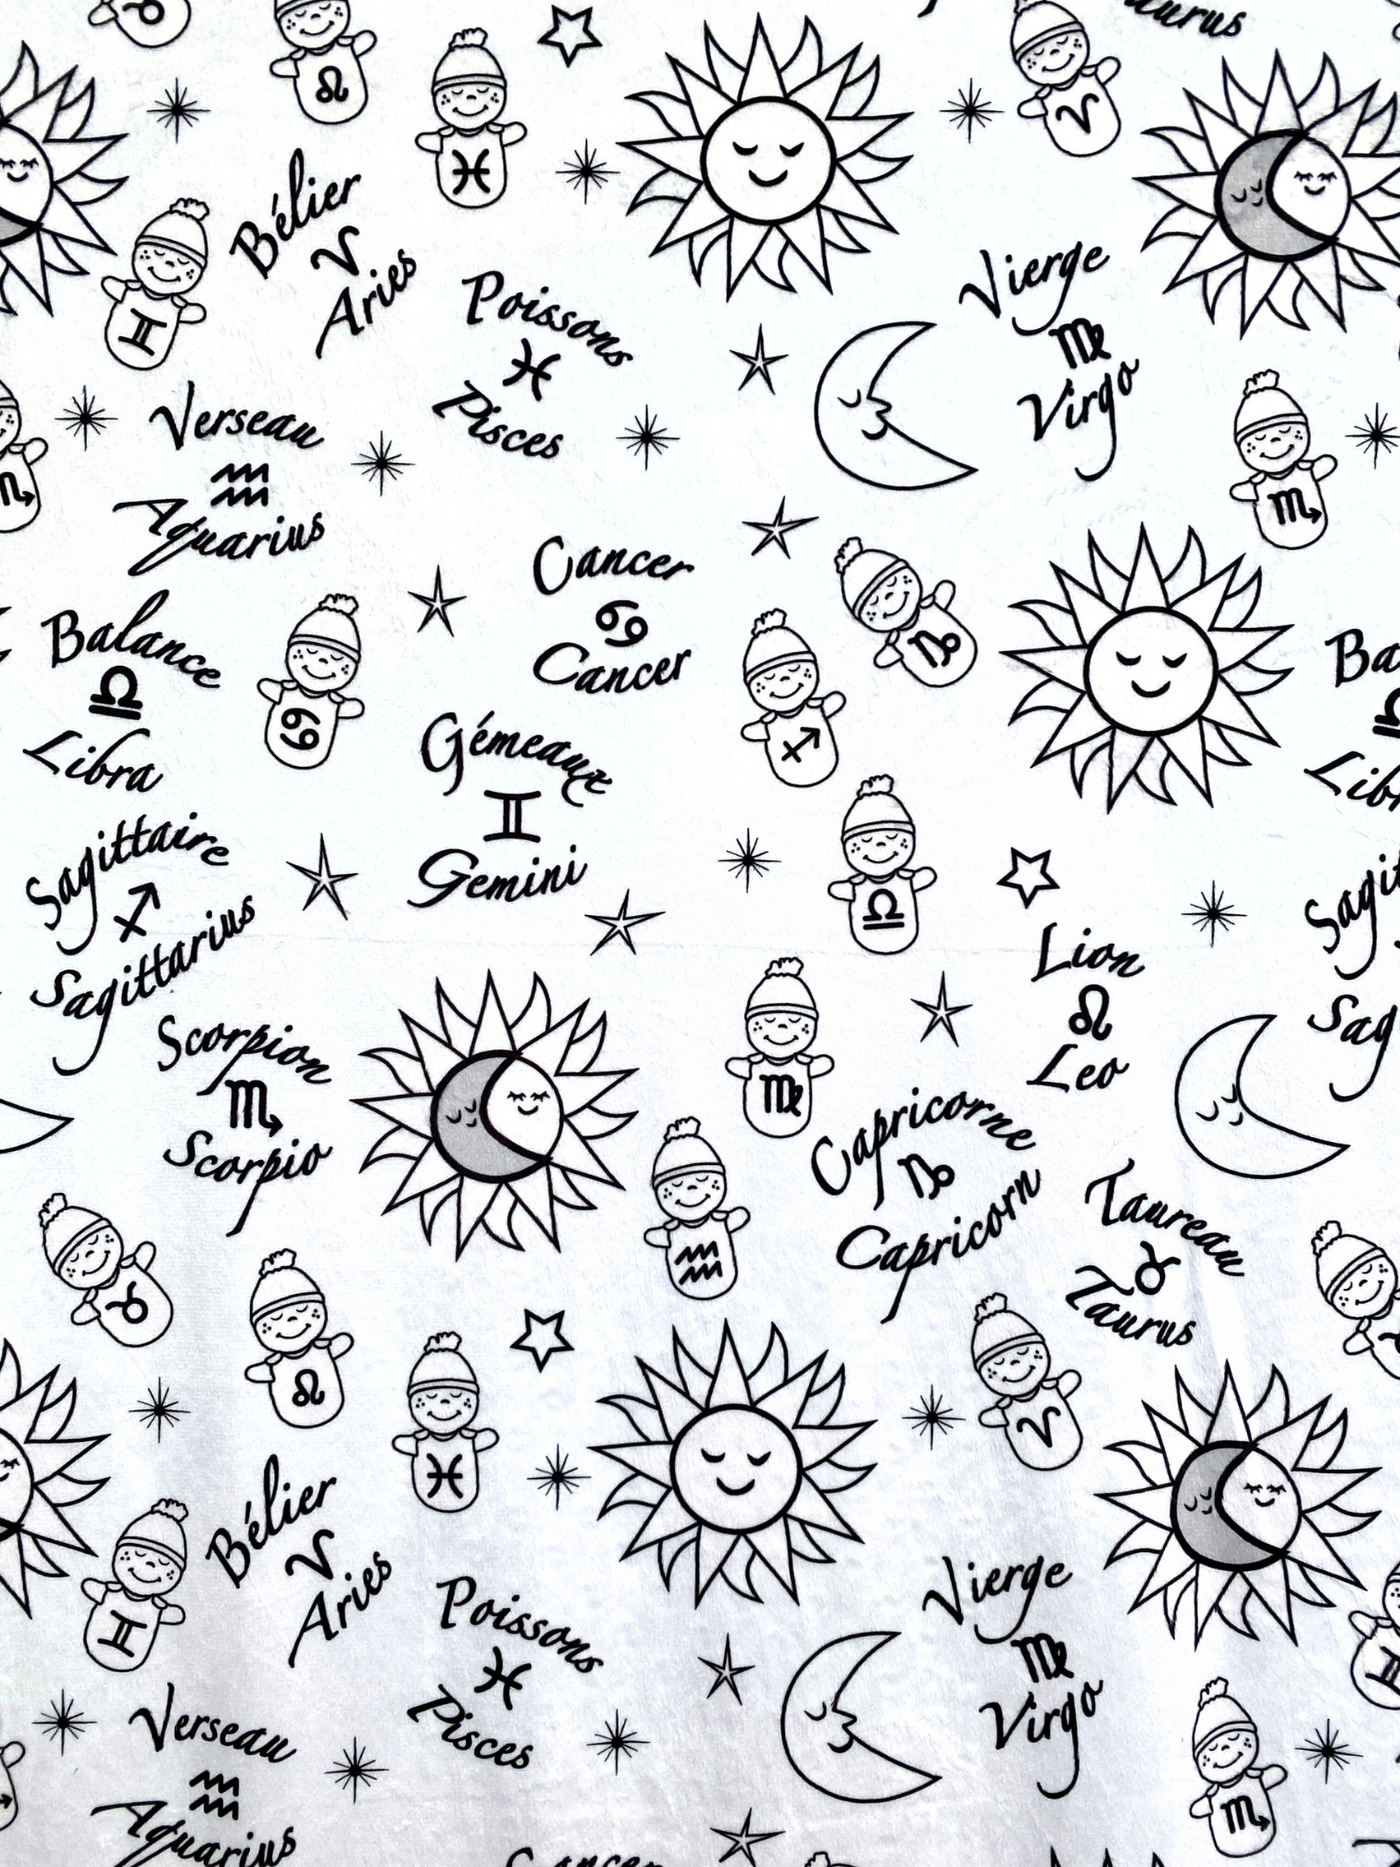 Giant blanket: Astrological Signs (White Background)